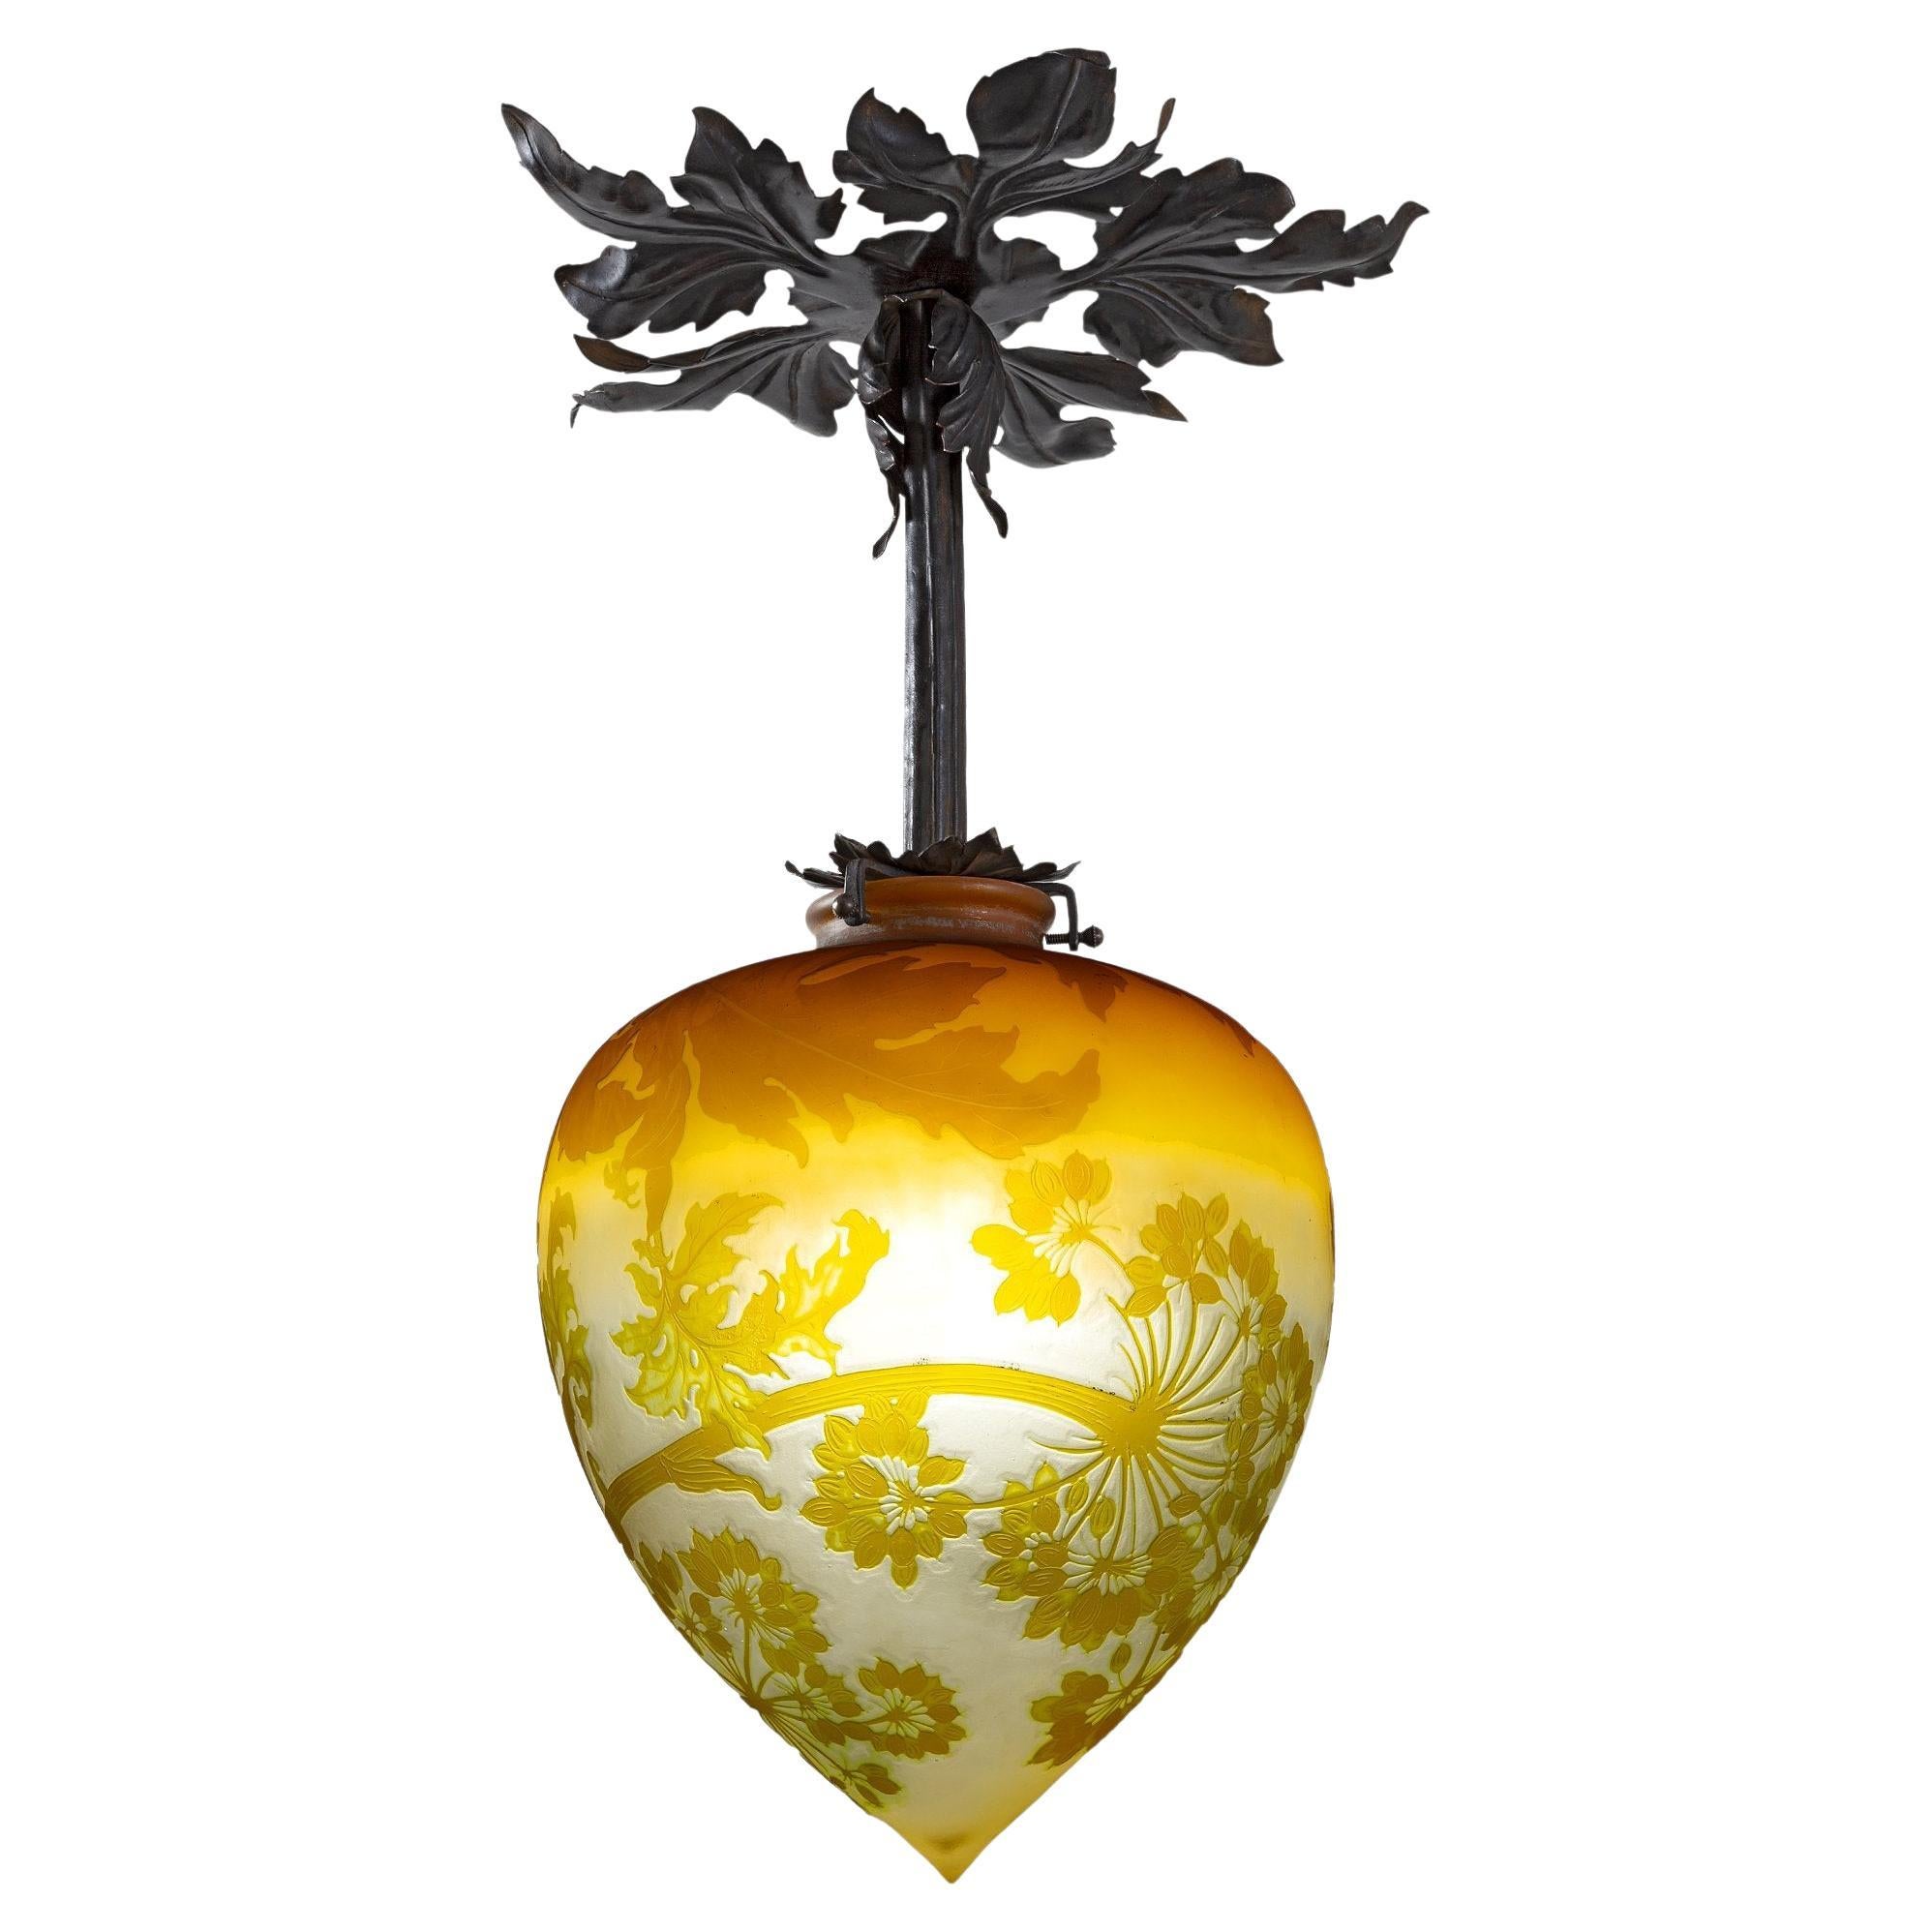 Cameo Glass Chandelier by Emile Gallé